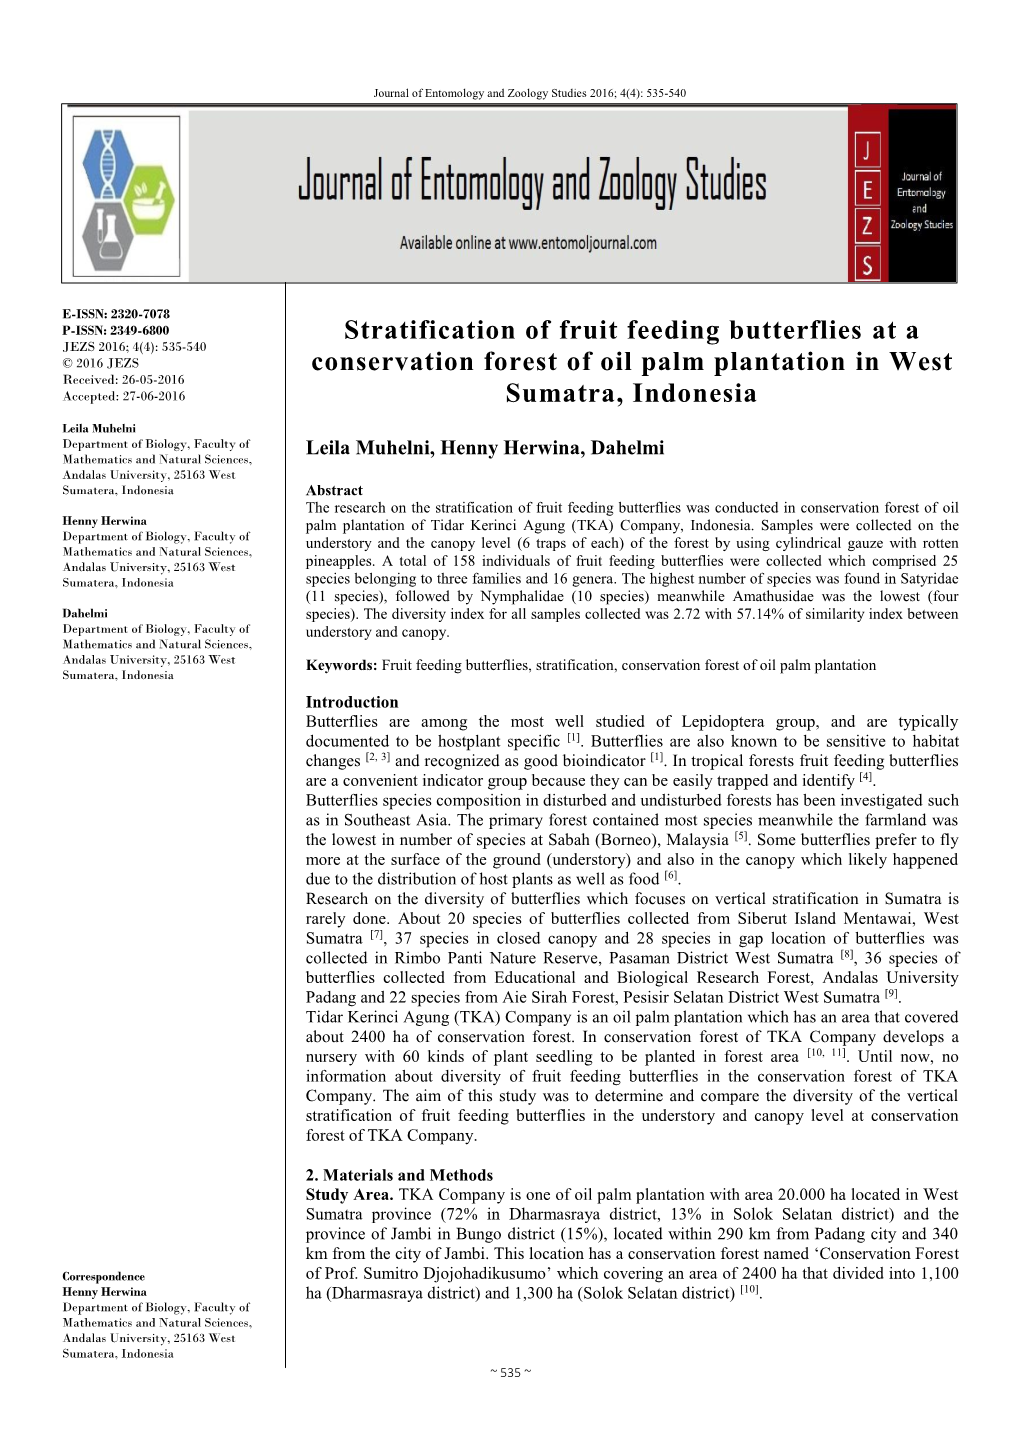 Stratification of Fruit Feeding Butterflies at a Conservation Forest of Oil Palm